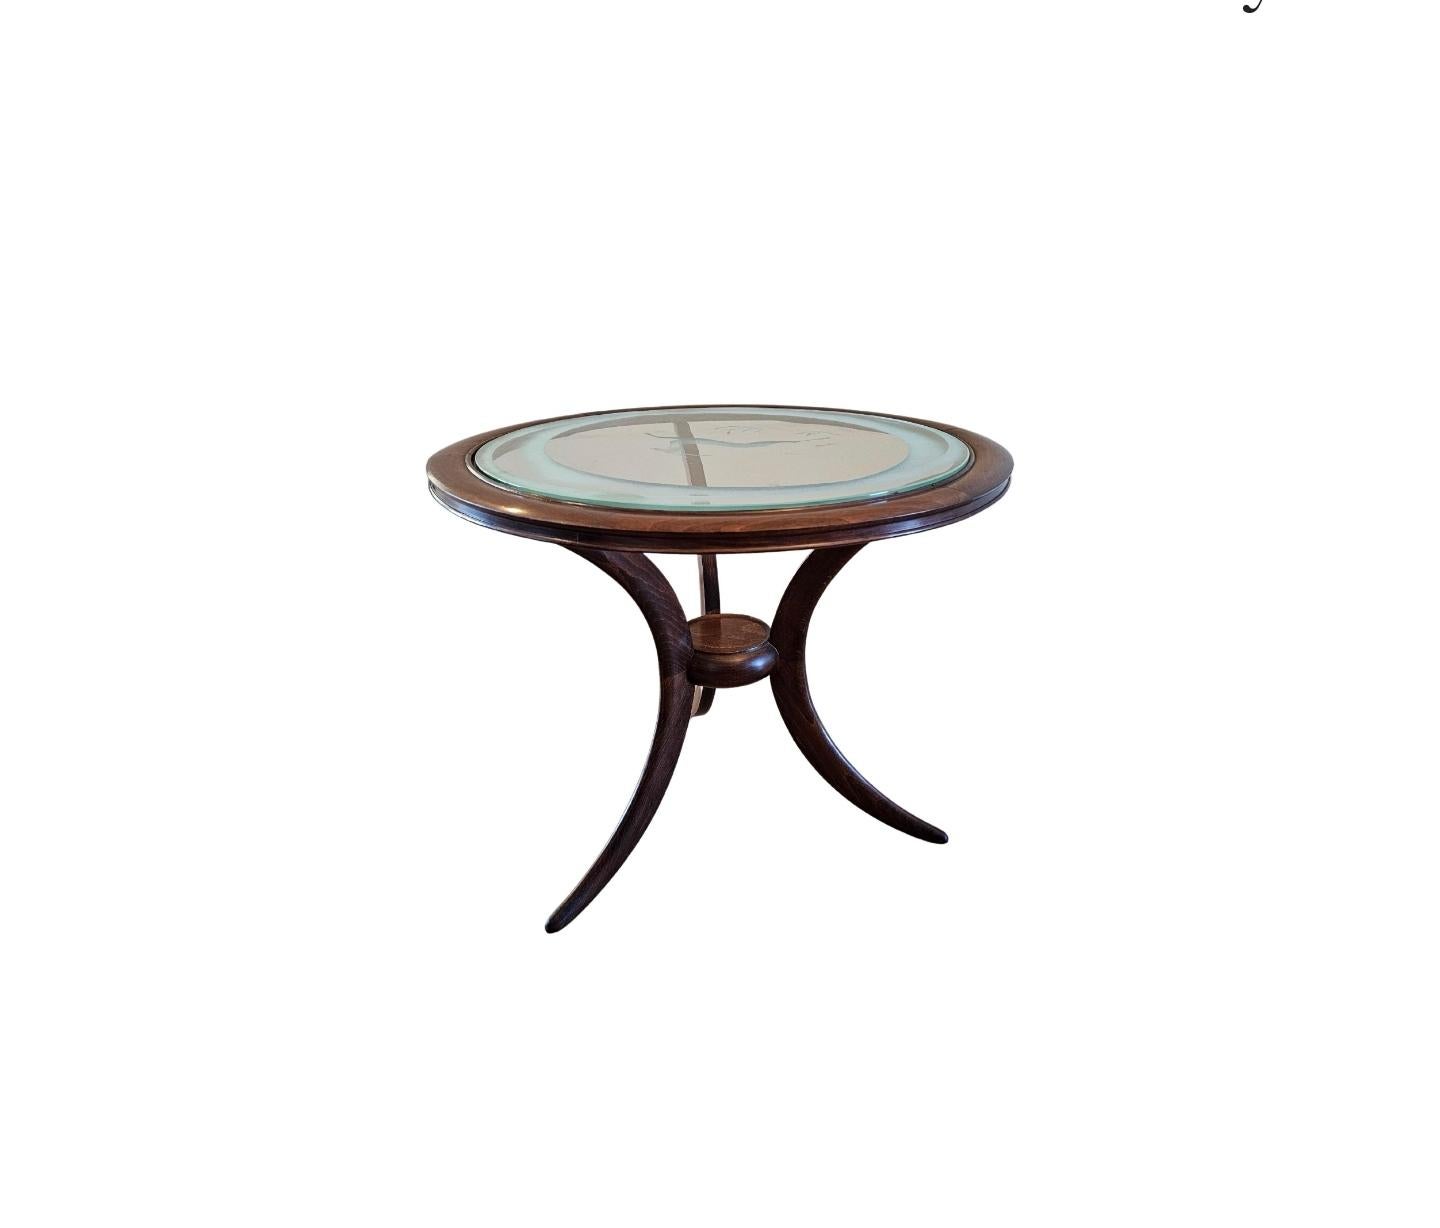 A vintage Italian mid-century modern round occasional table.

Italy, circa 1940s, in the manner of legendary Italian modernist architect and designer Ico Parisi, two-tier, featuring a inset circular glass top with etched leaping impala design,